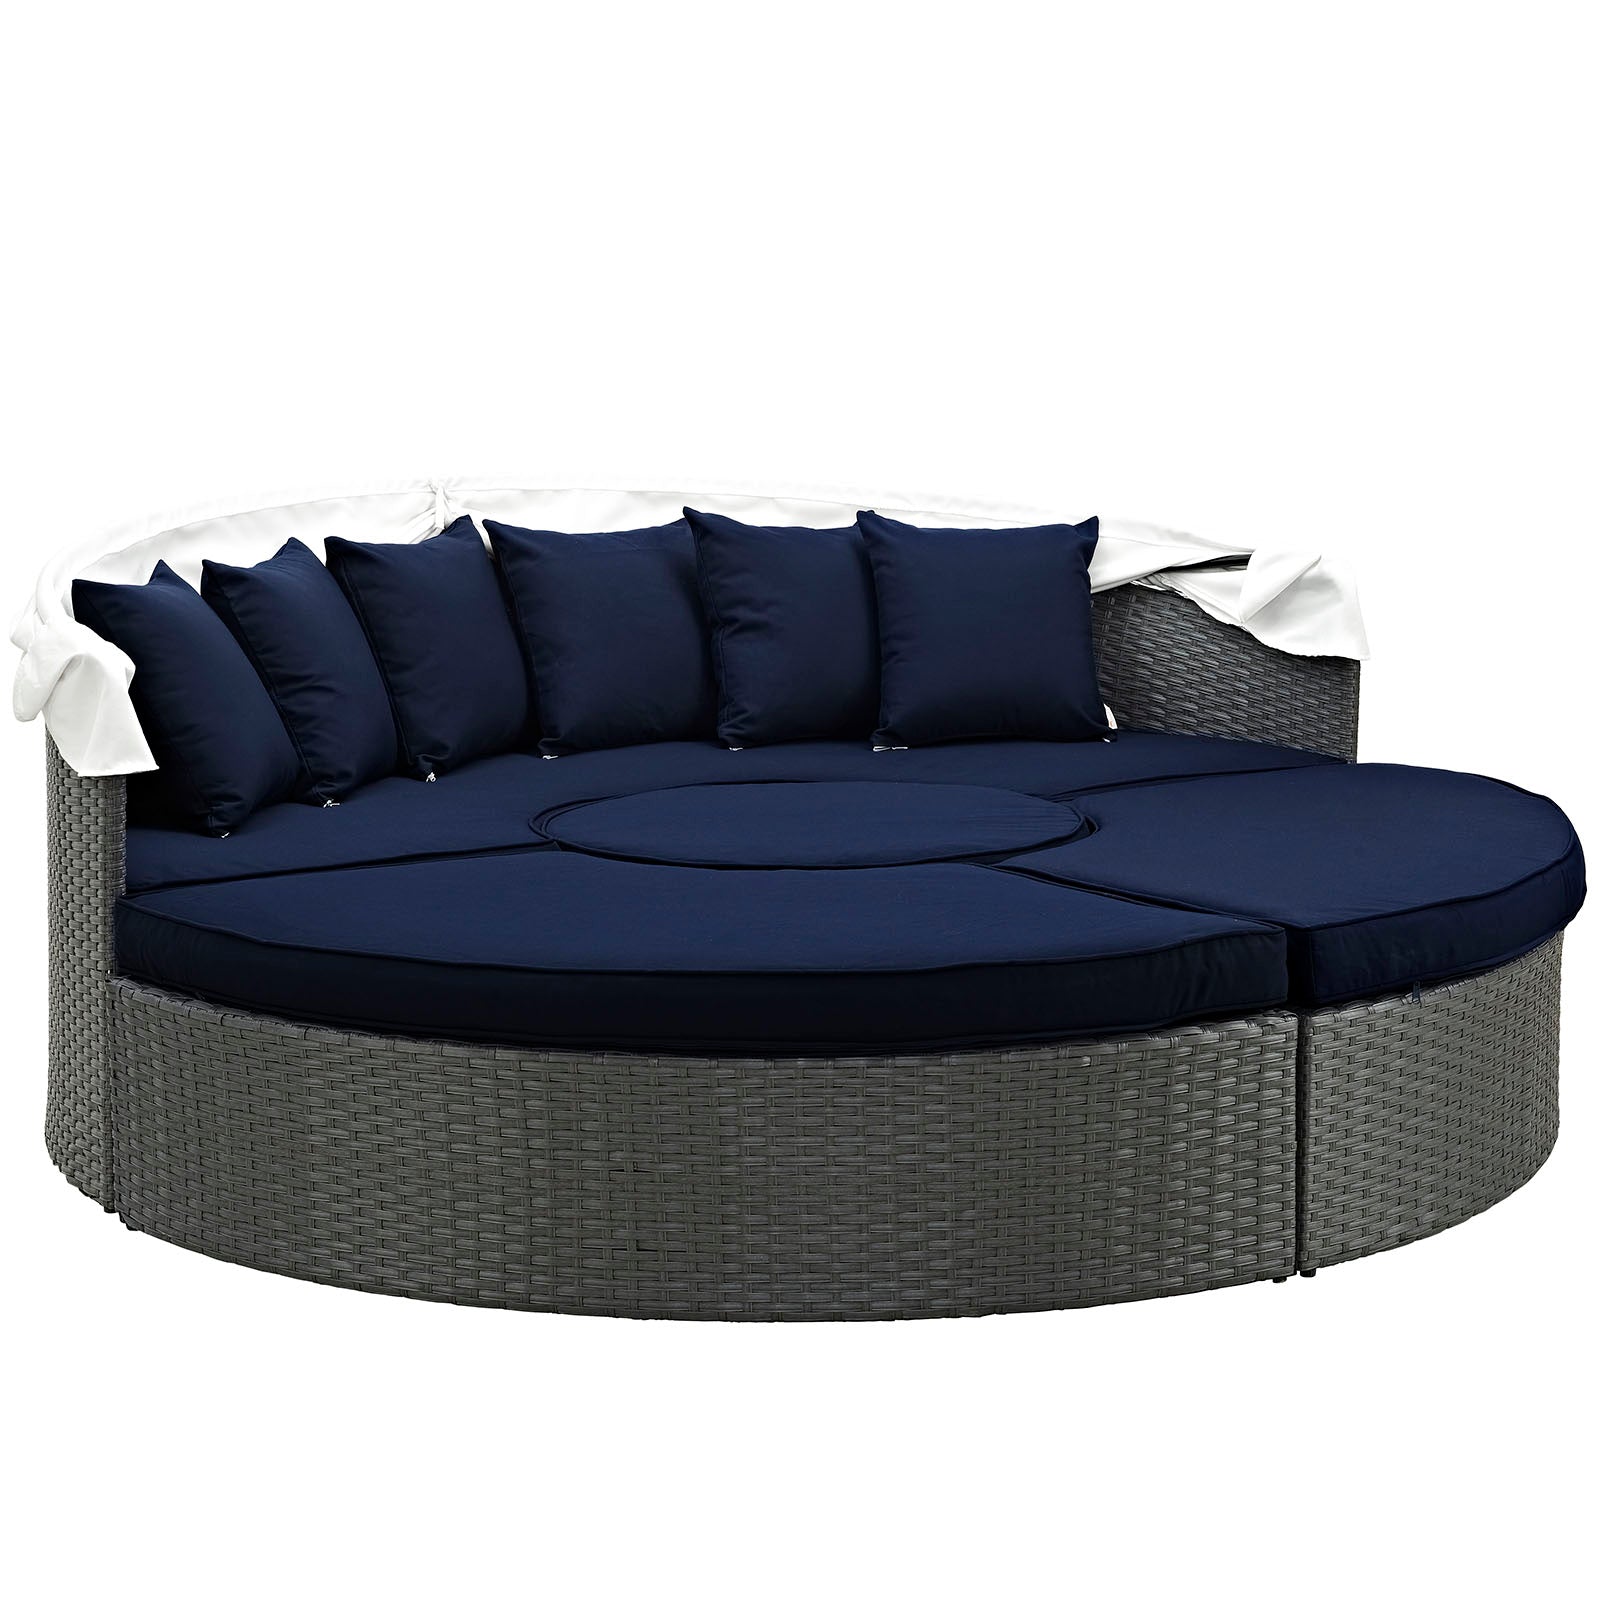 Modway Patio Daybeds - Sojourn Outdoor Patio Sunbrella Daybed Canvas Navy